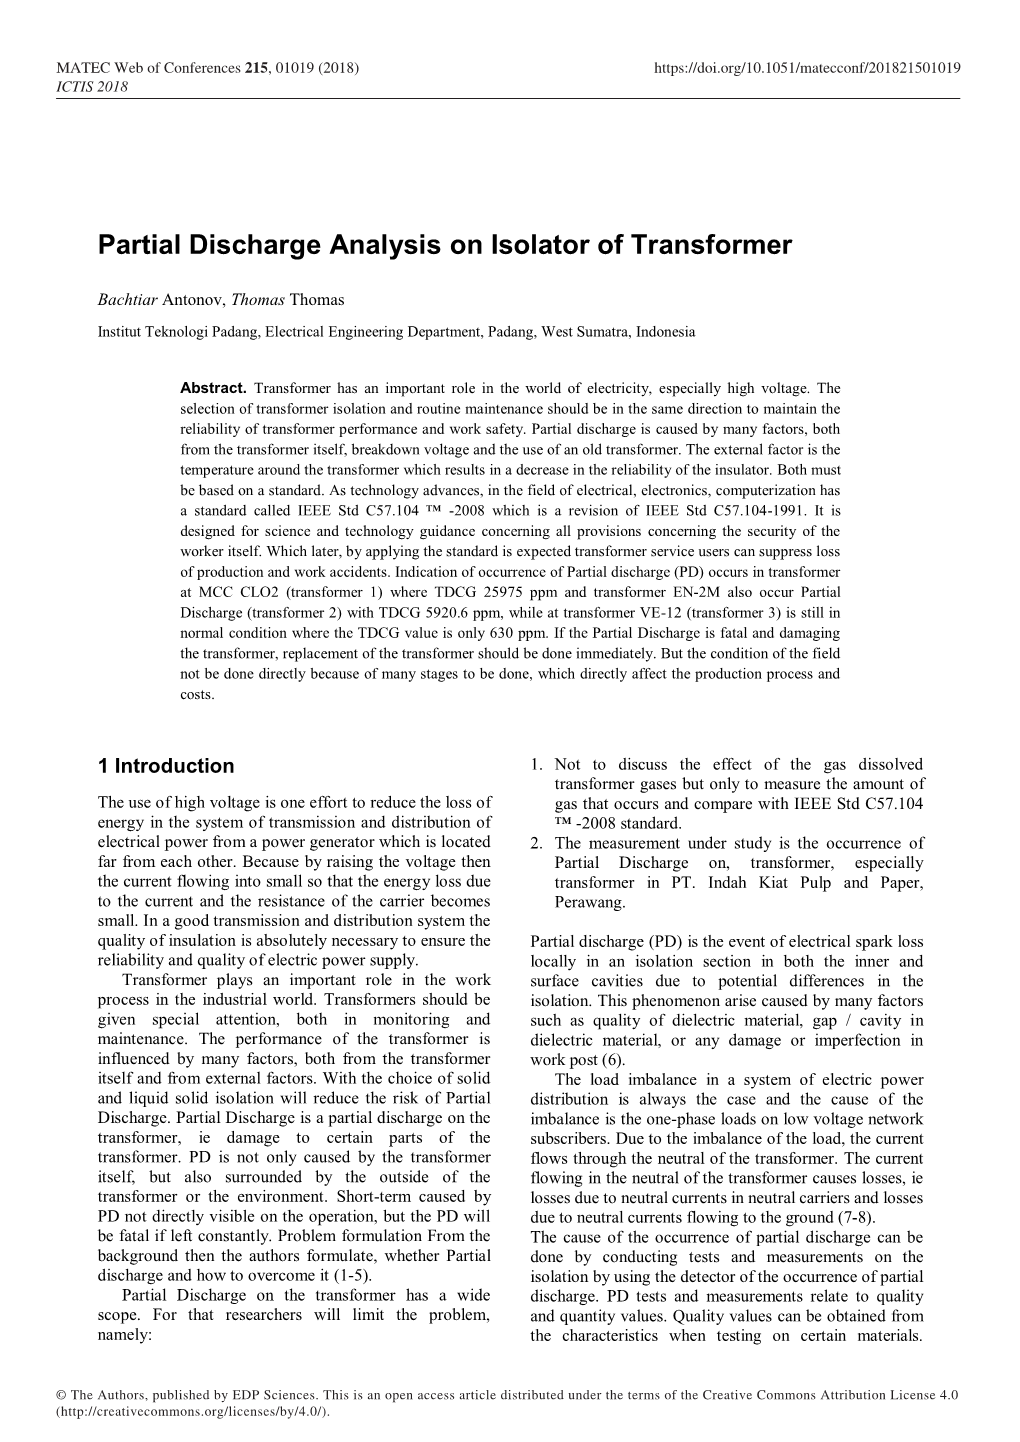 Partial Discharge Analysis on Isolator of Transformer